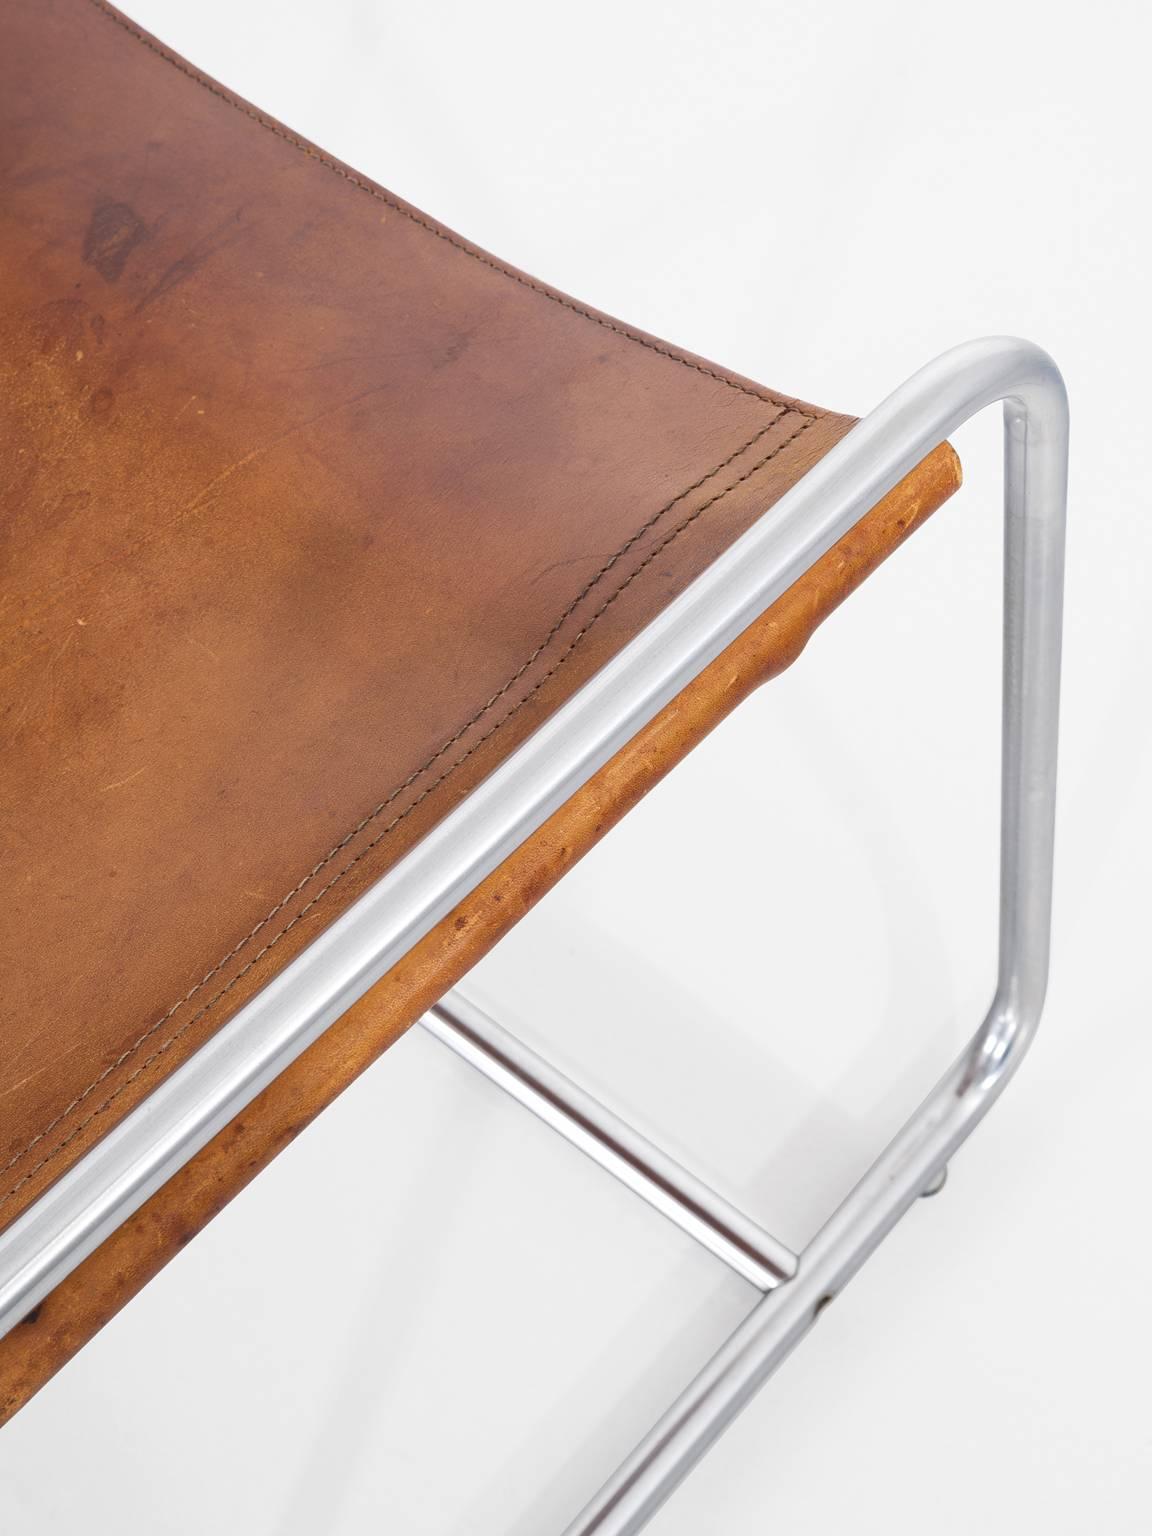 Leather Clair Bataille & Paul Ibens Set of 6 Tubular Chairs in Cognac for 't Spectrum 